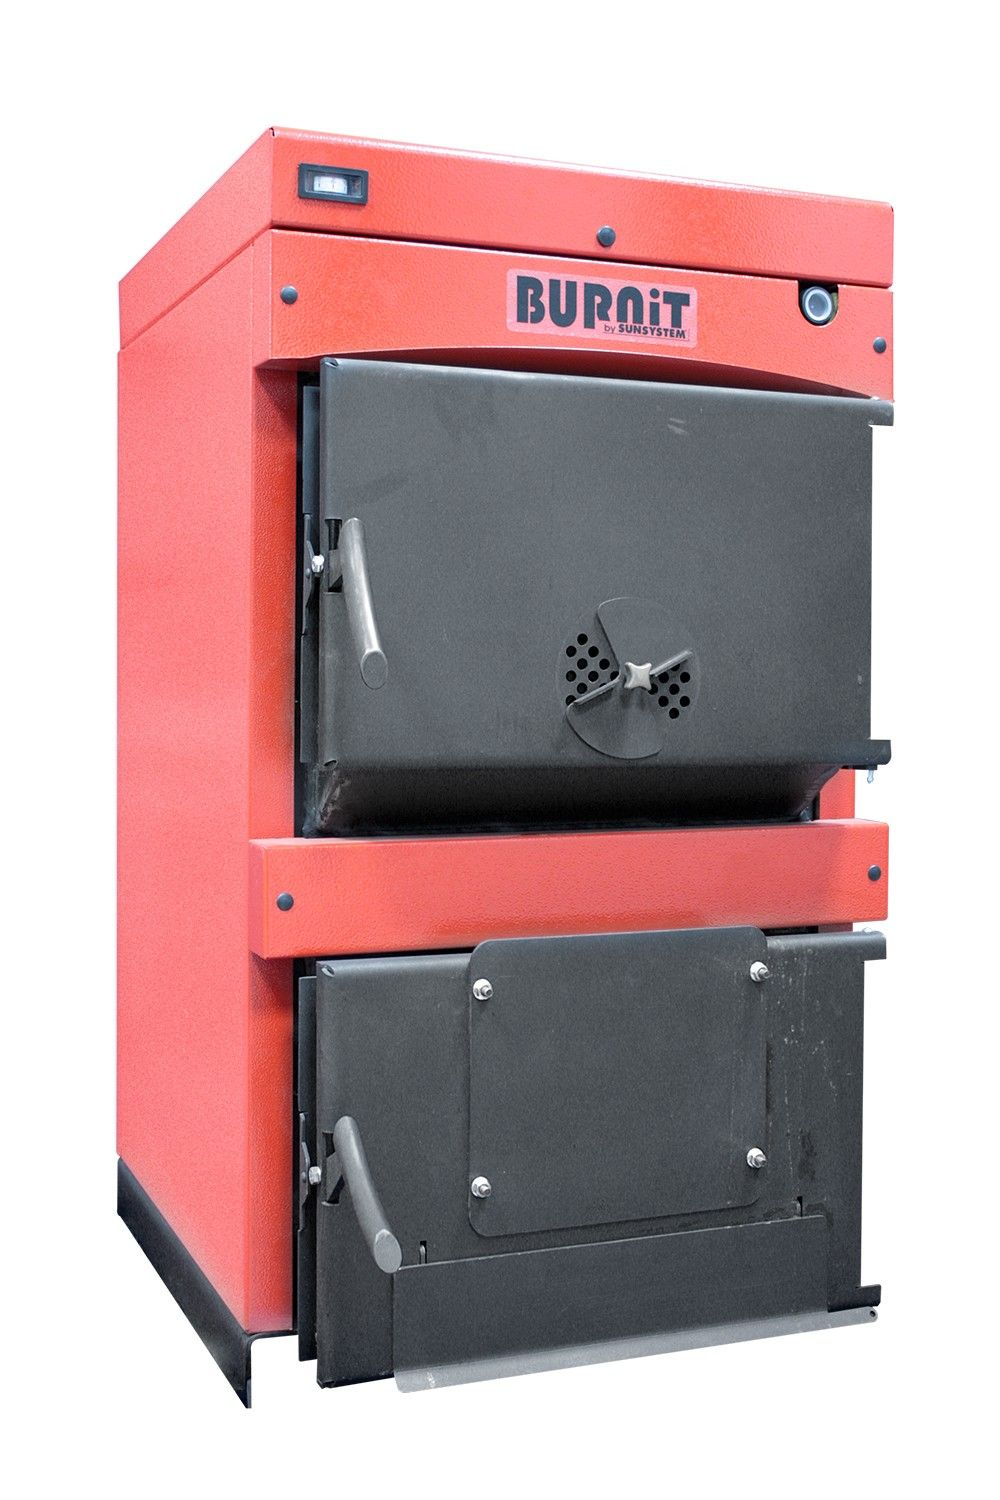 BURNiT WBS 20 kW solid fuel boiler